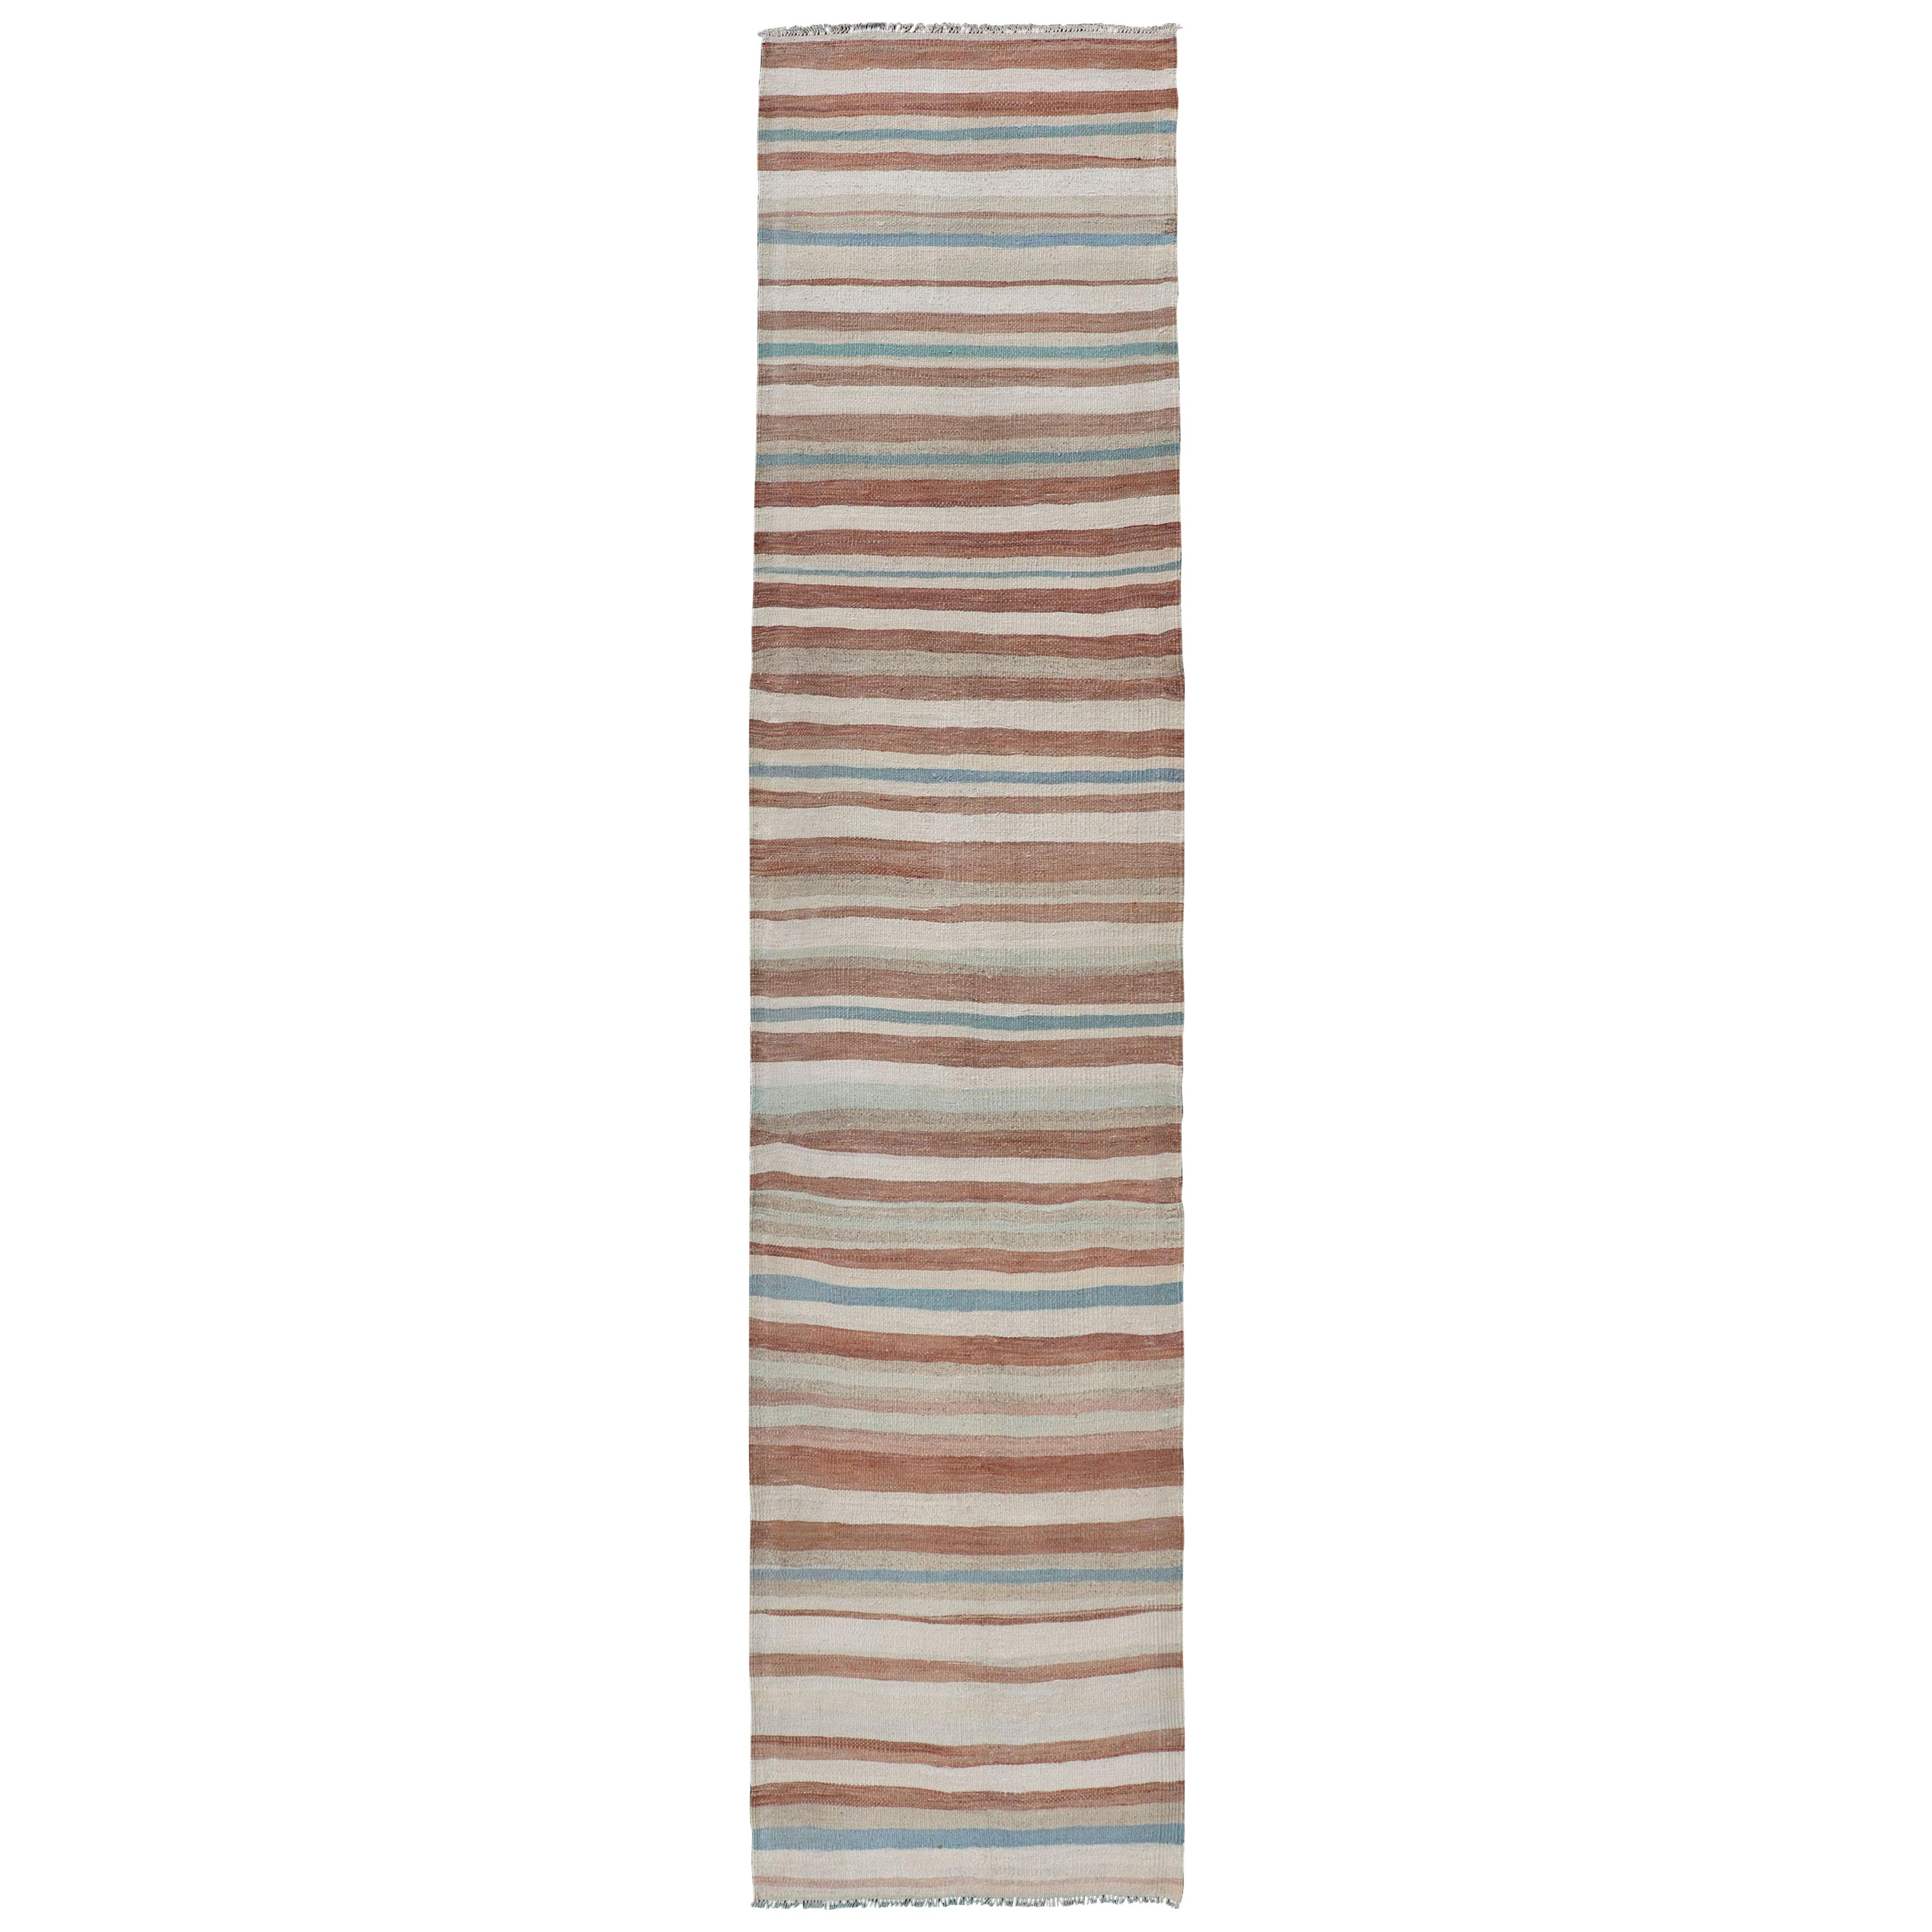 Striped Vintage Turkish Kilim Runner in Shades of Brown, Cream, and Blue